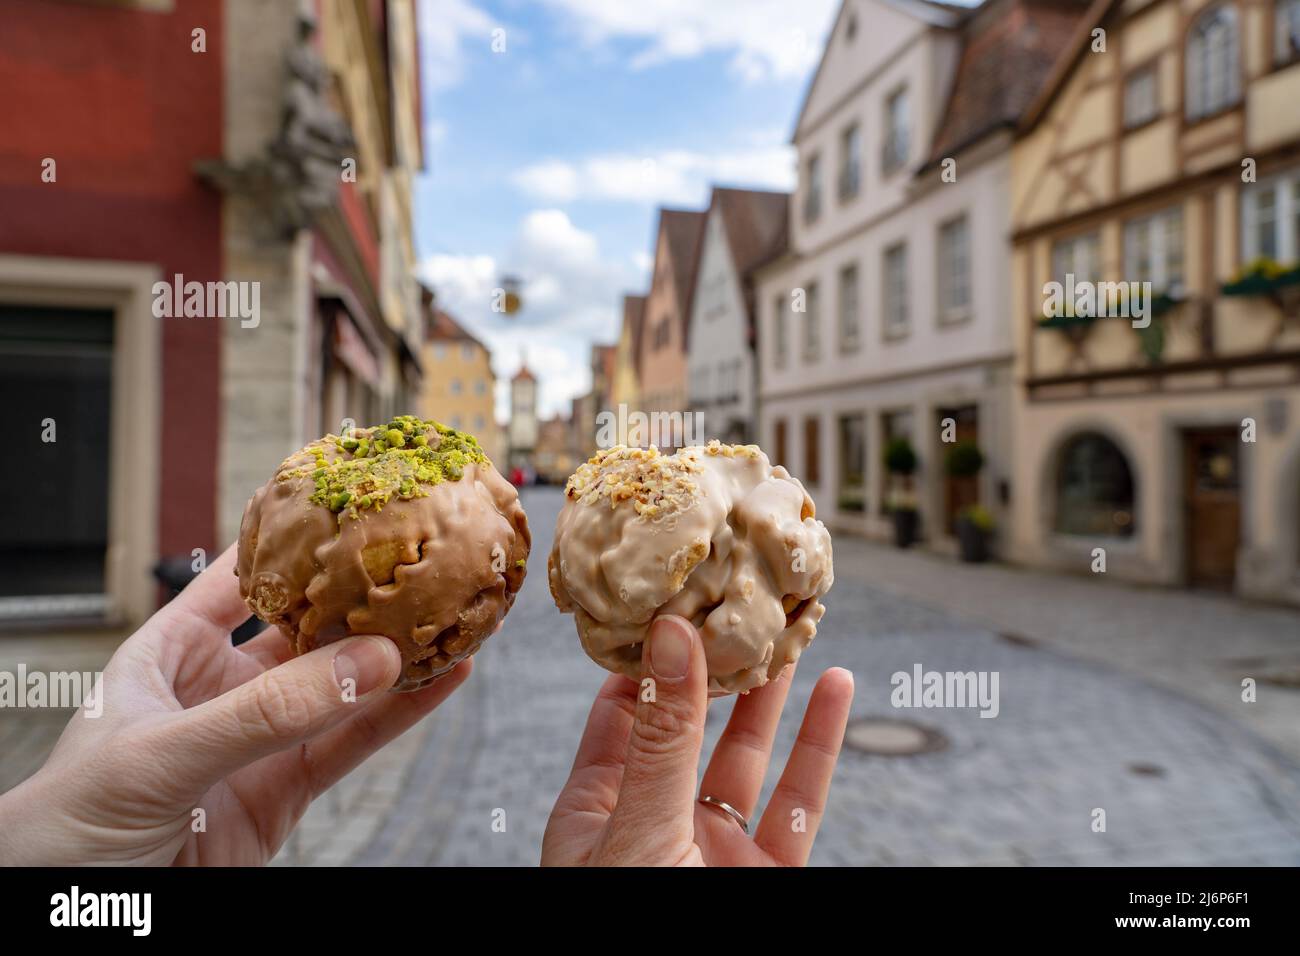 eating traditional schneeball snowball cake together the cake of the romantic Rothenburg ob der Tauber with timbered Fachwerkhaus syle houses in Bavar Stock Photo